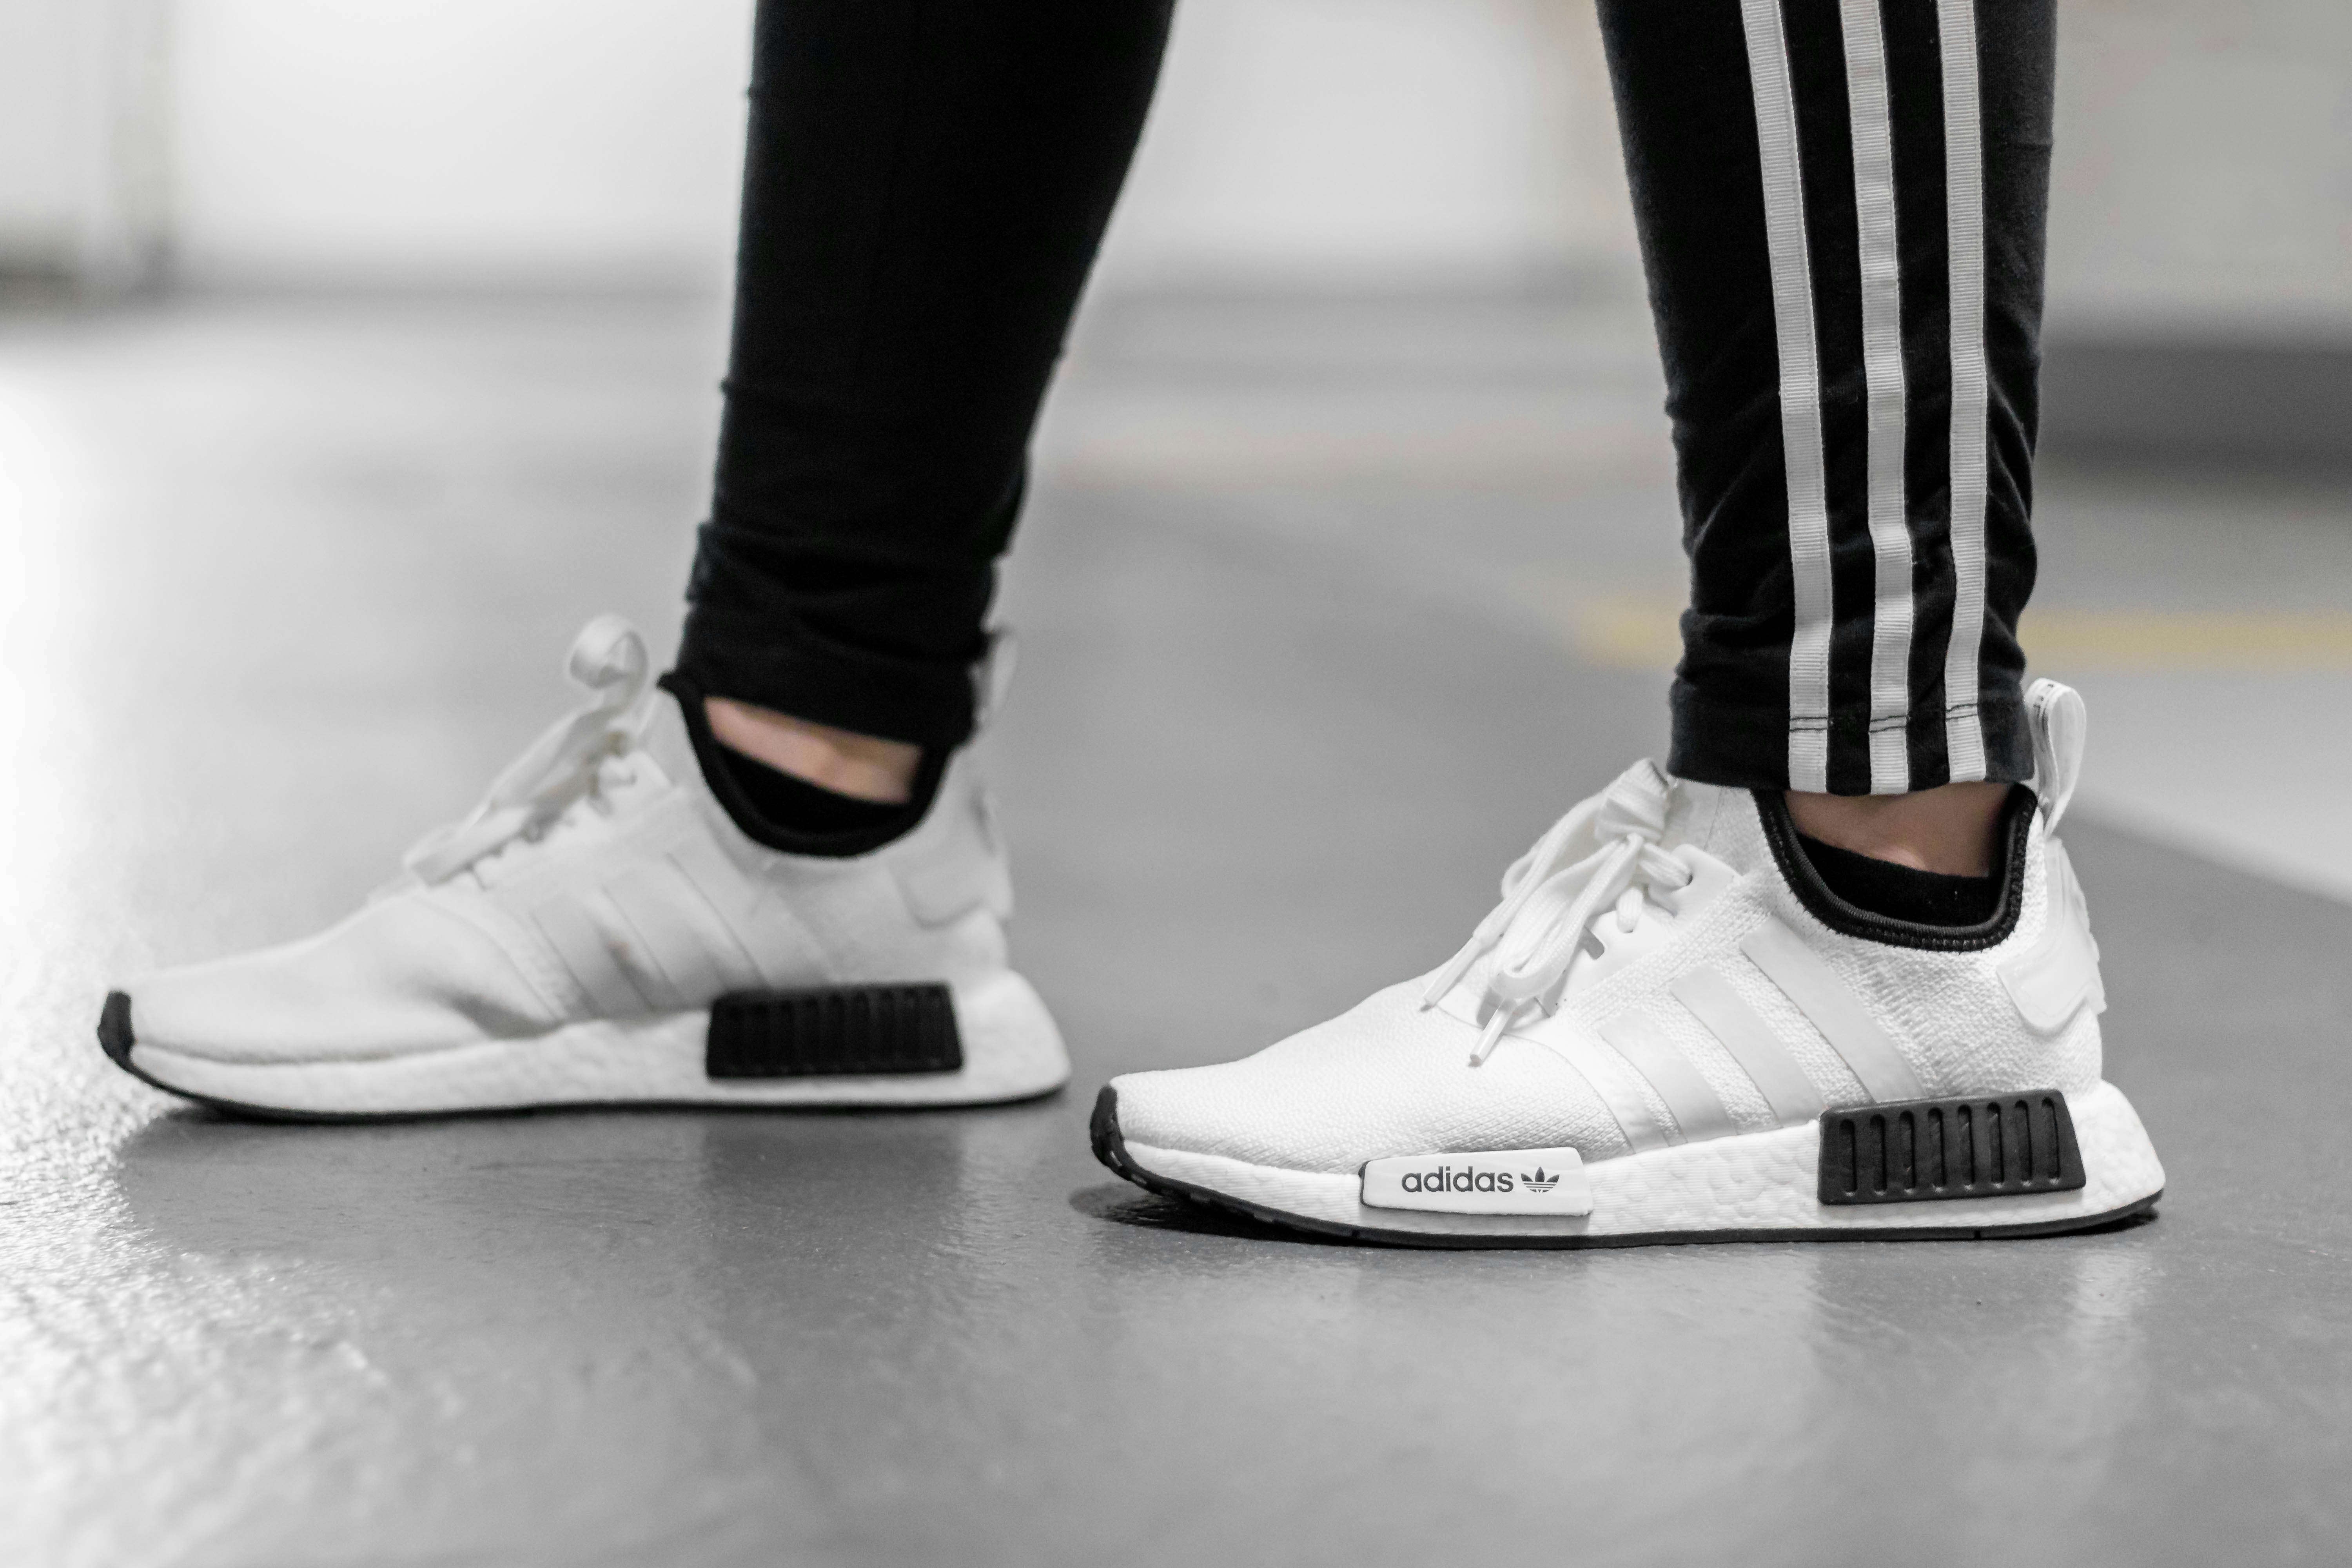 person wearing white Adidas NMD shoes